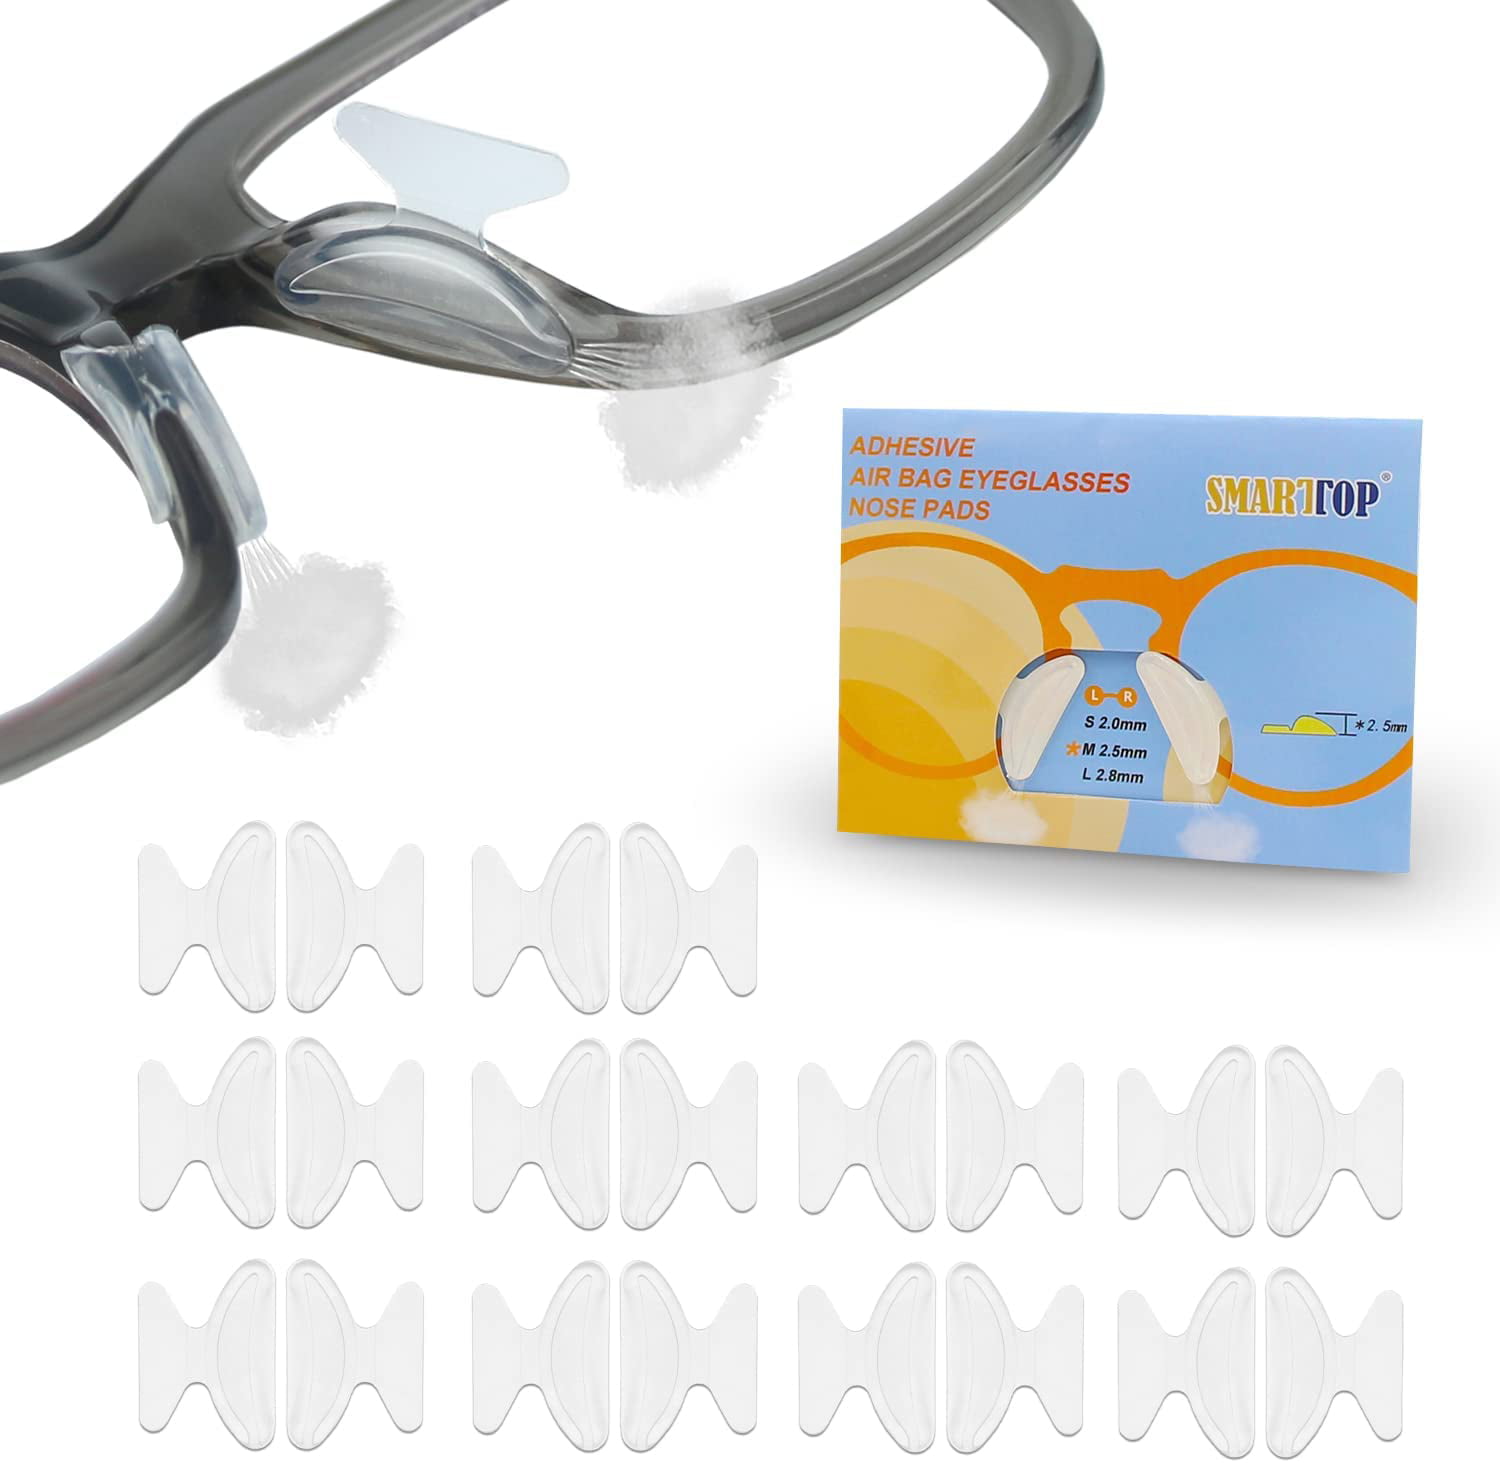 Eyeglass Nose Pads Transparent 12 Pairs 2.5mm Stick on Anti-Slip Adhesive Soft Silicone Nose Cushions for Eyeglass Sunglasses Spectacles 